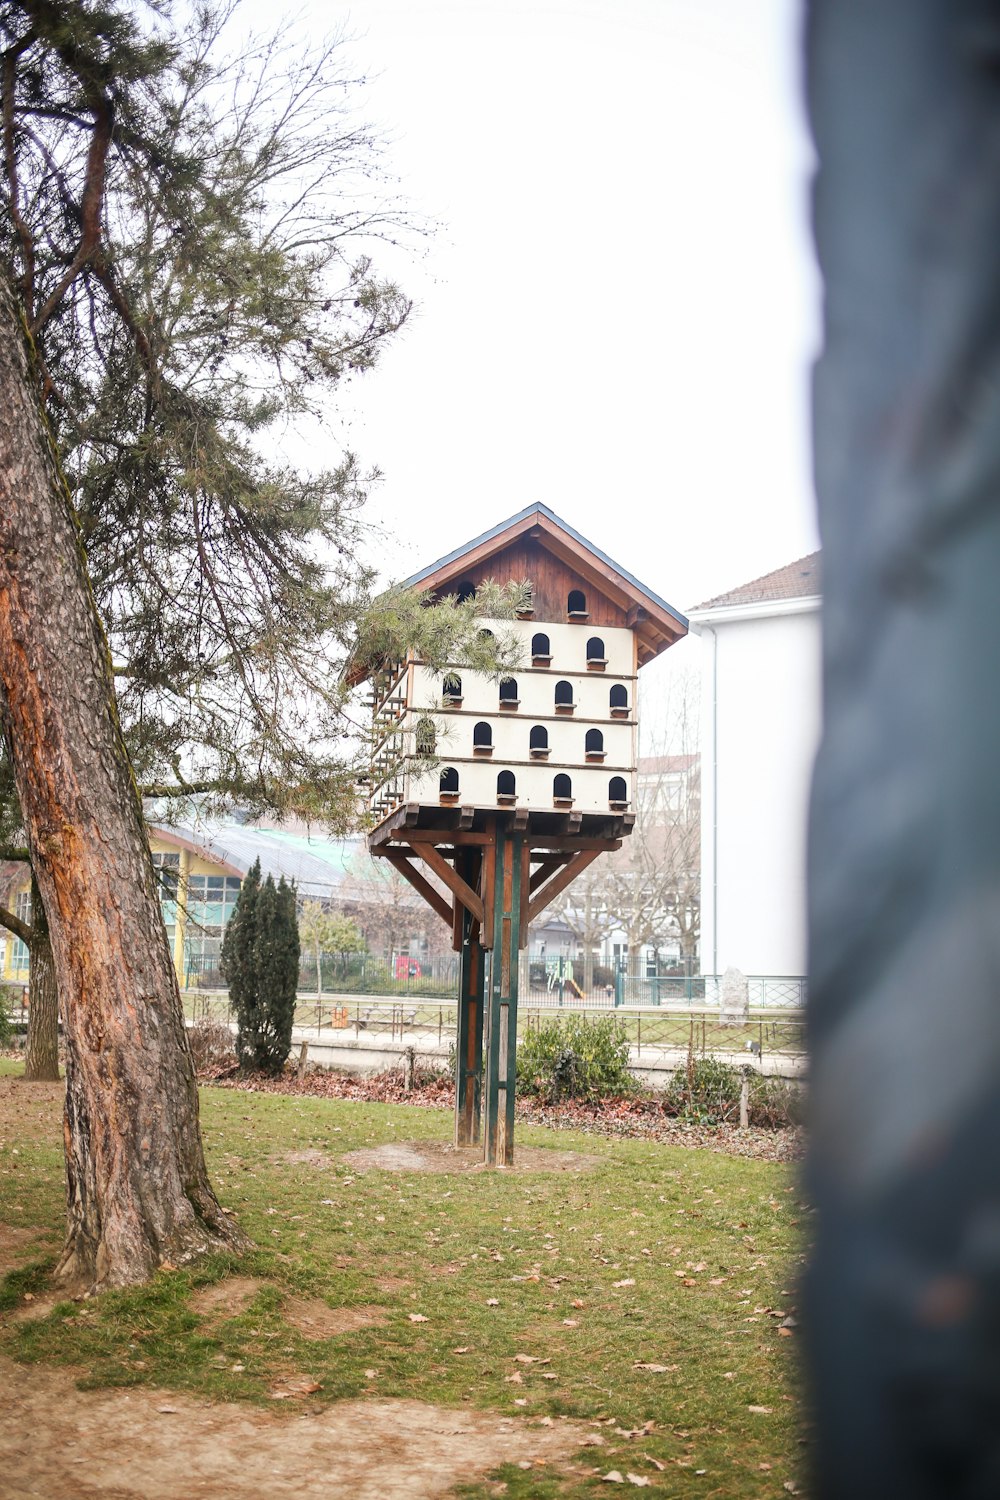 a bird house in the middle of a park